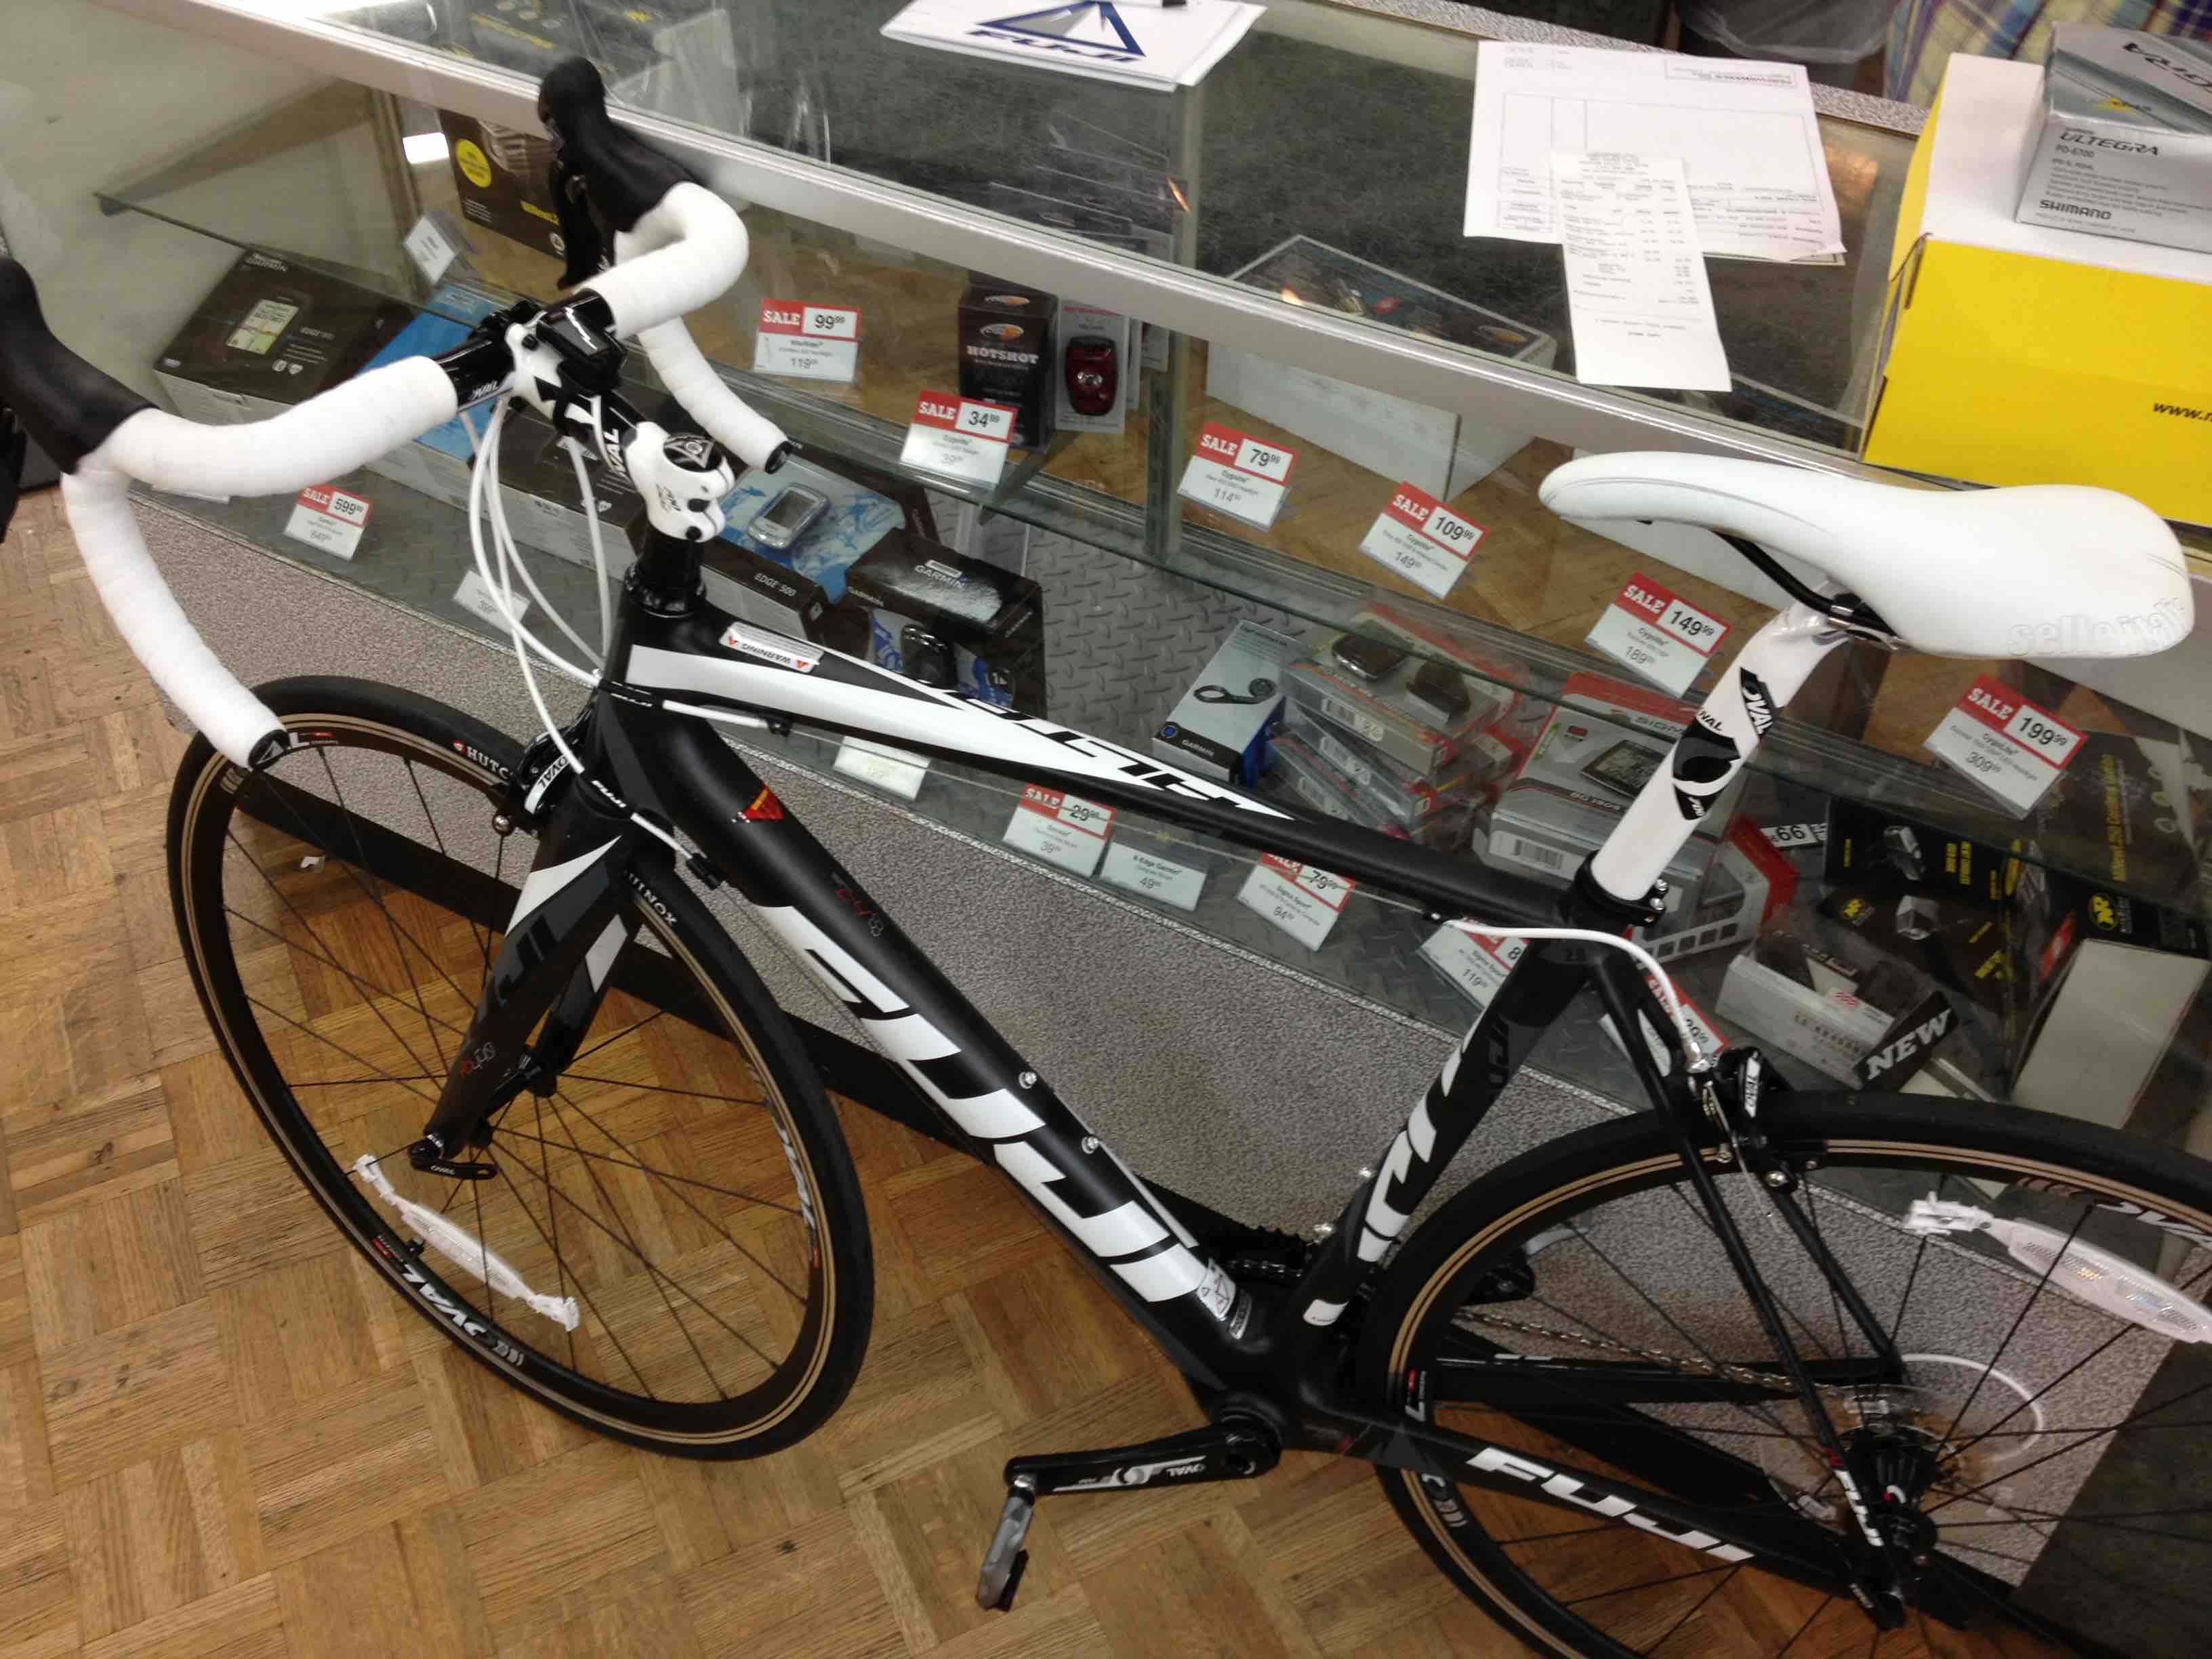 Fuji Altamira bicycle at Performance Bicycle shop just after purchasing